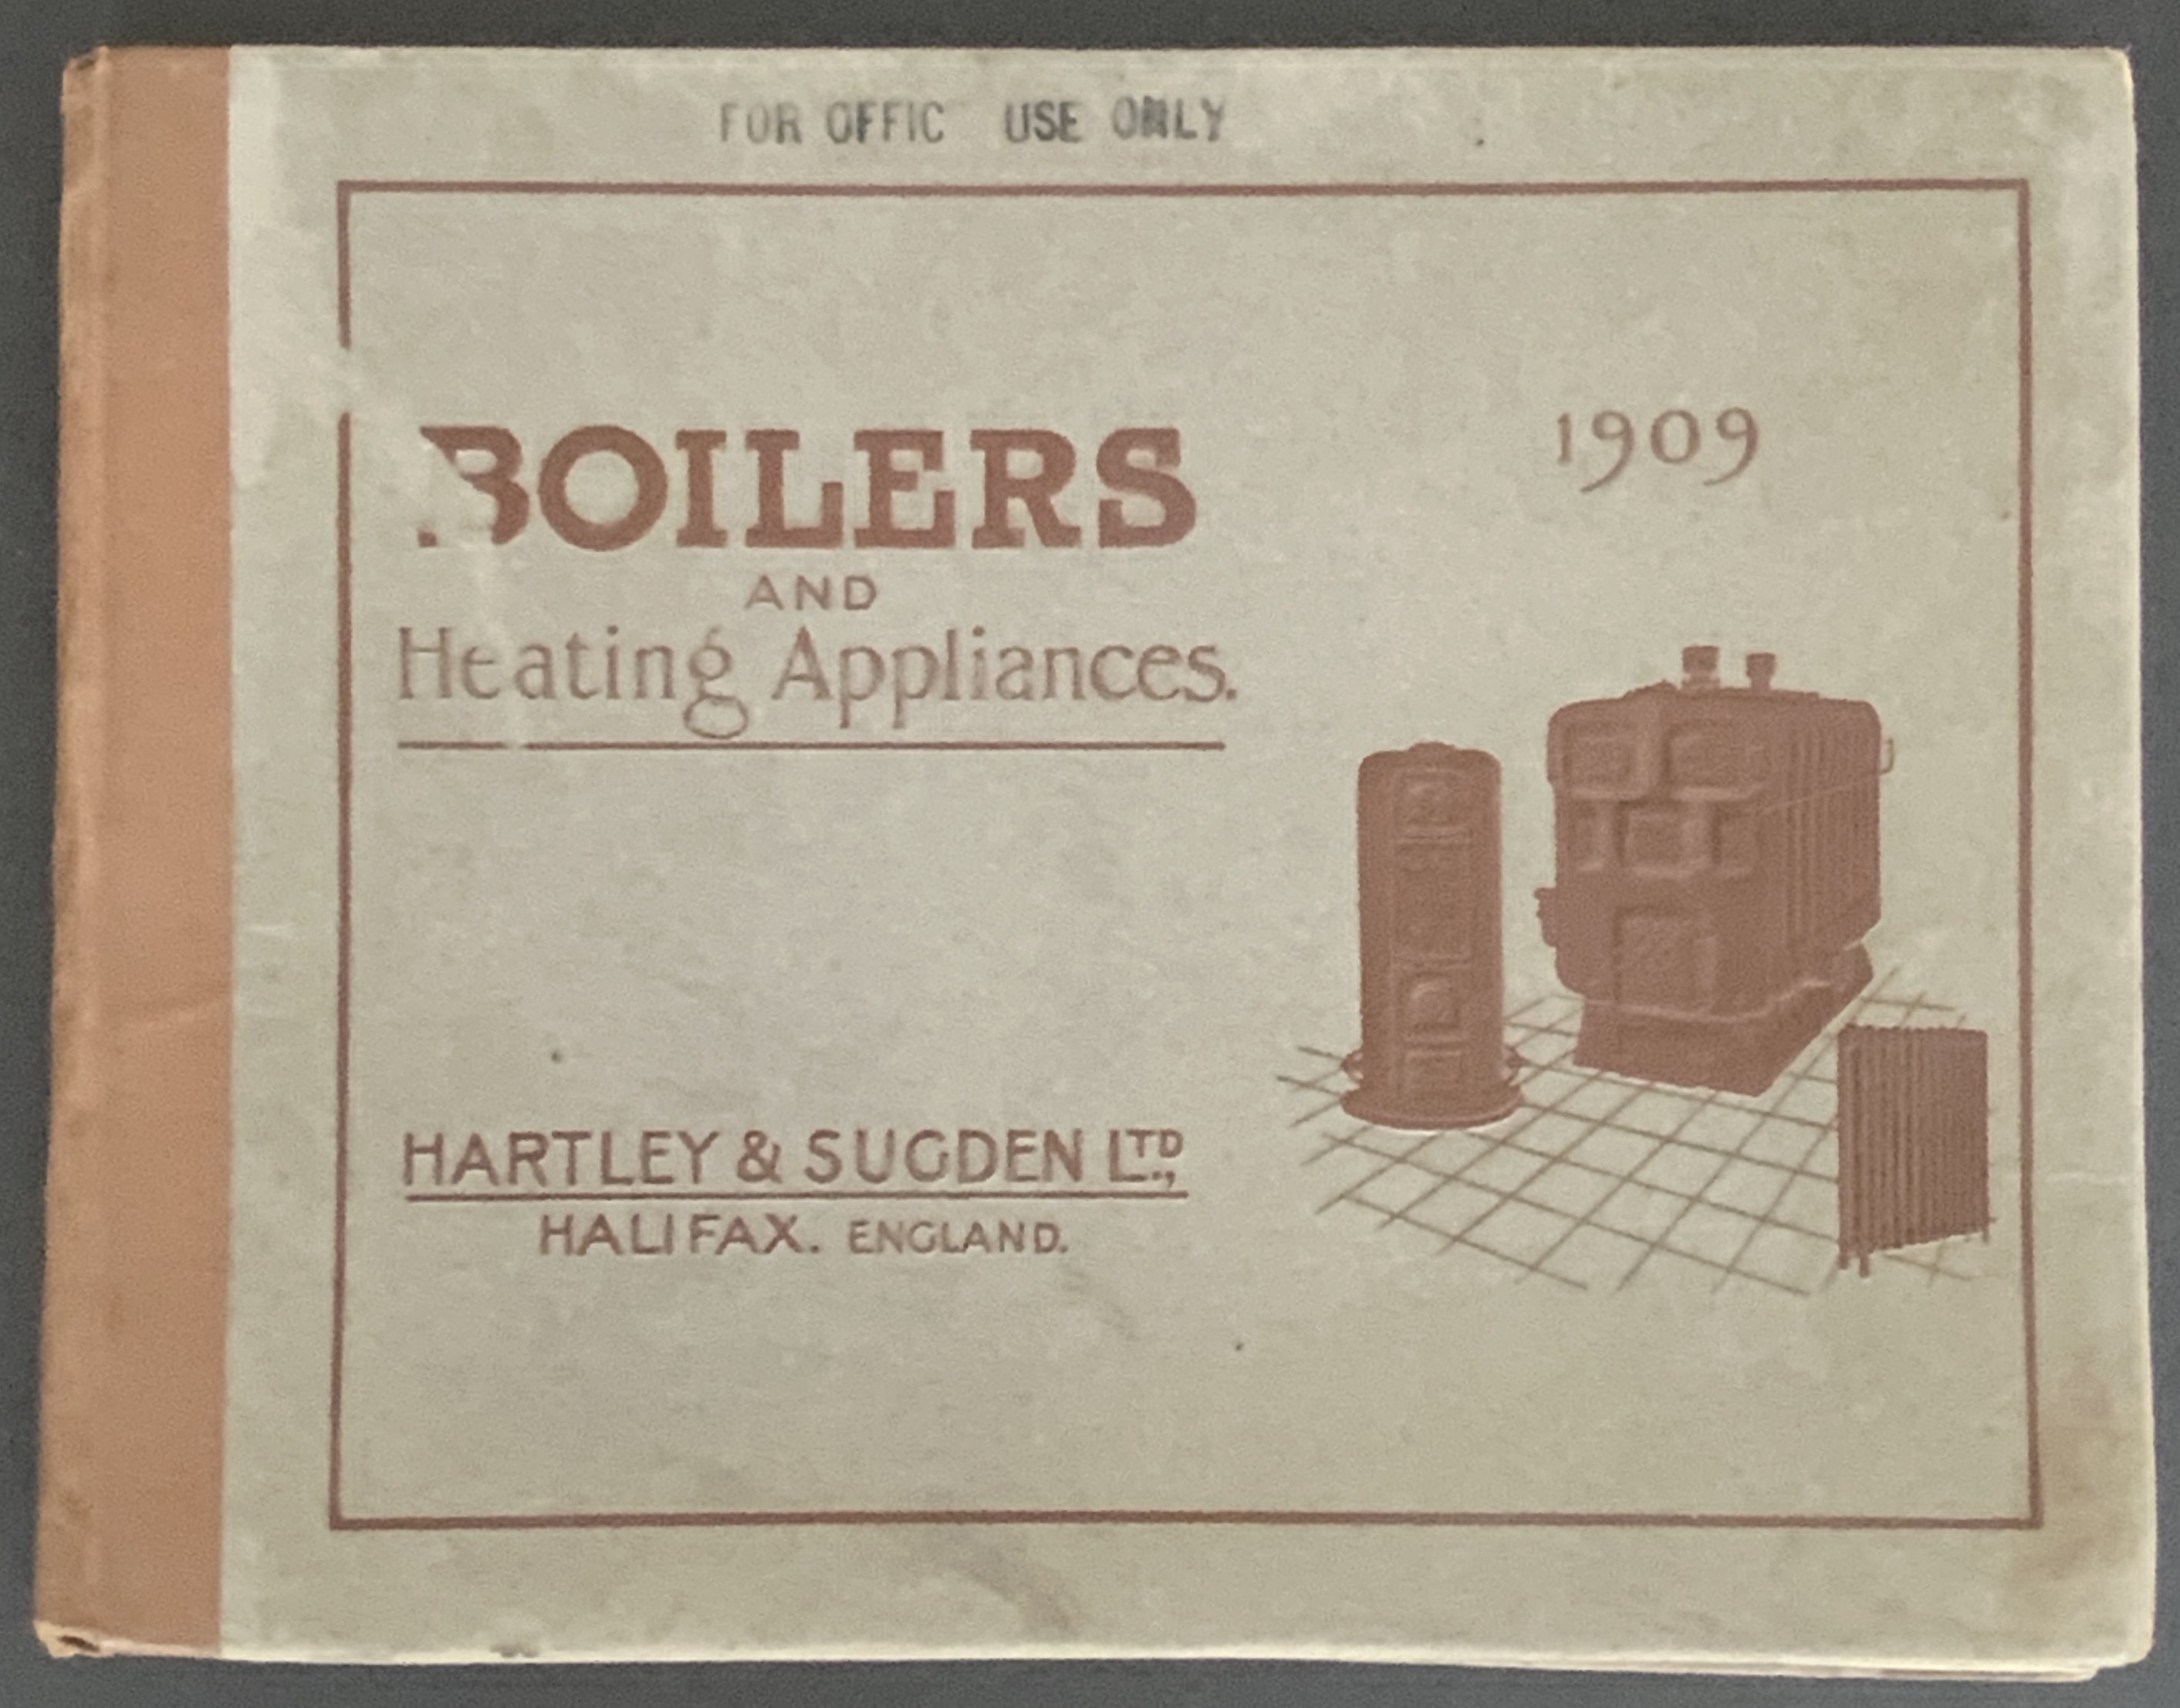 1909 BOILERS & HEATING APPLIANCES FOR HARTLEY & SUGDEN LTD CATALOGUE FOR OFFICE USE ONLY